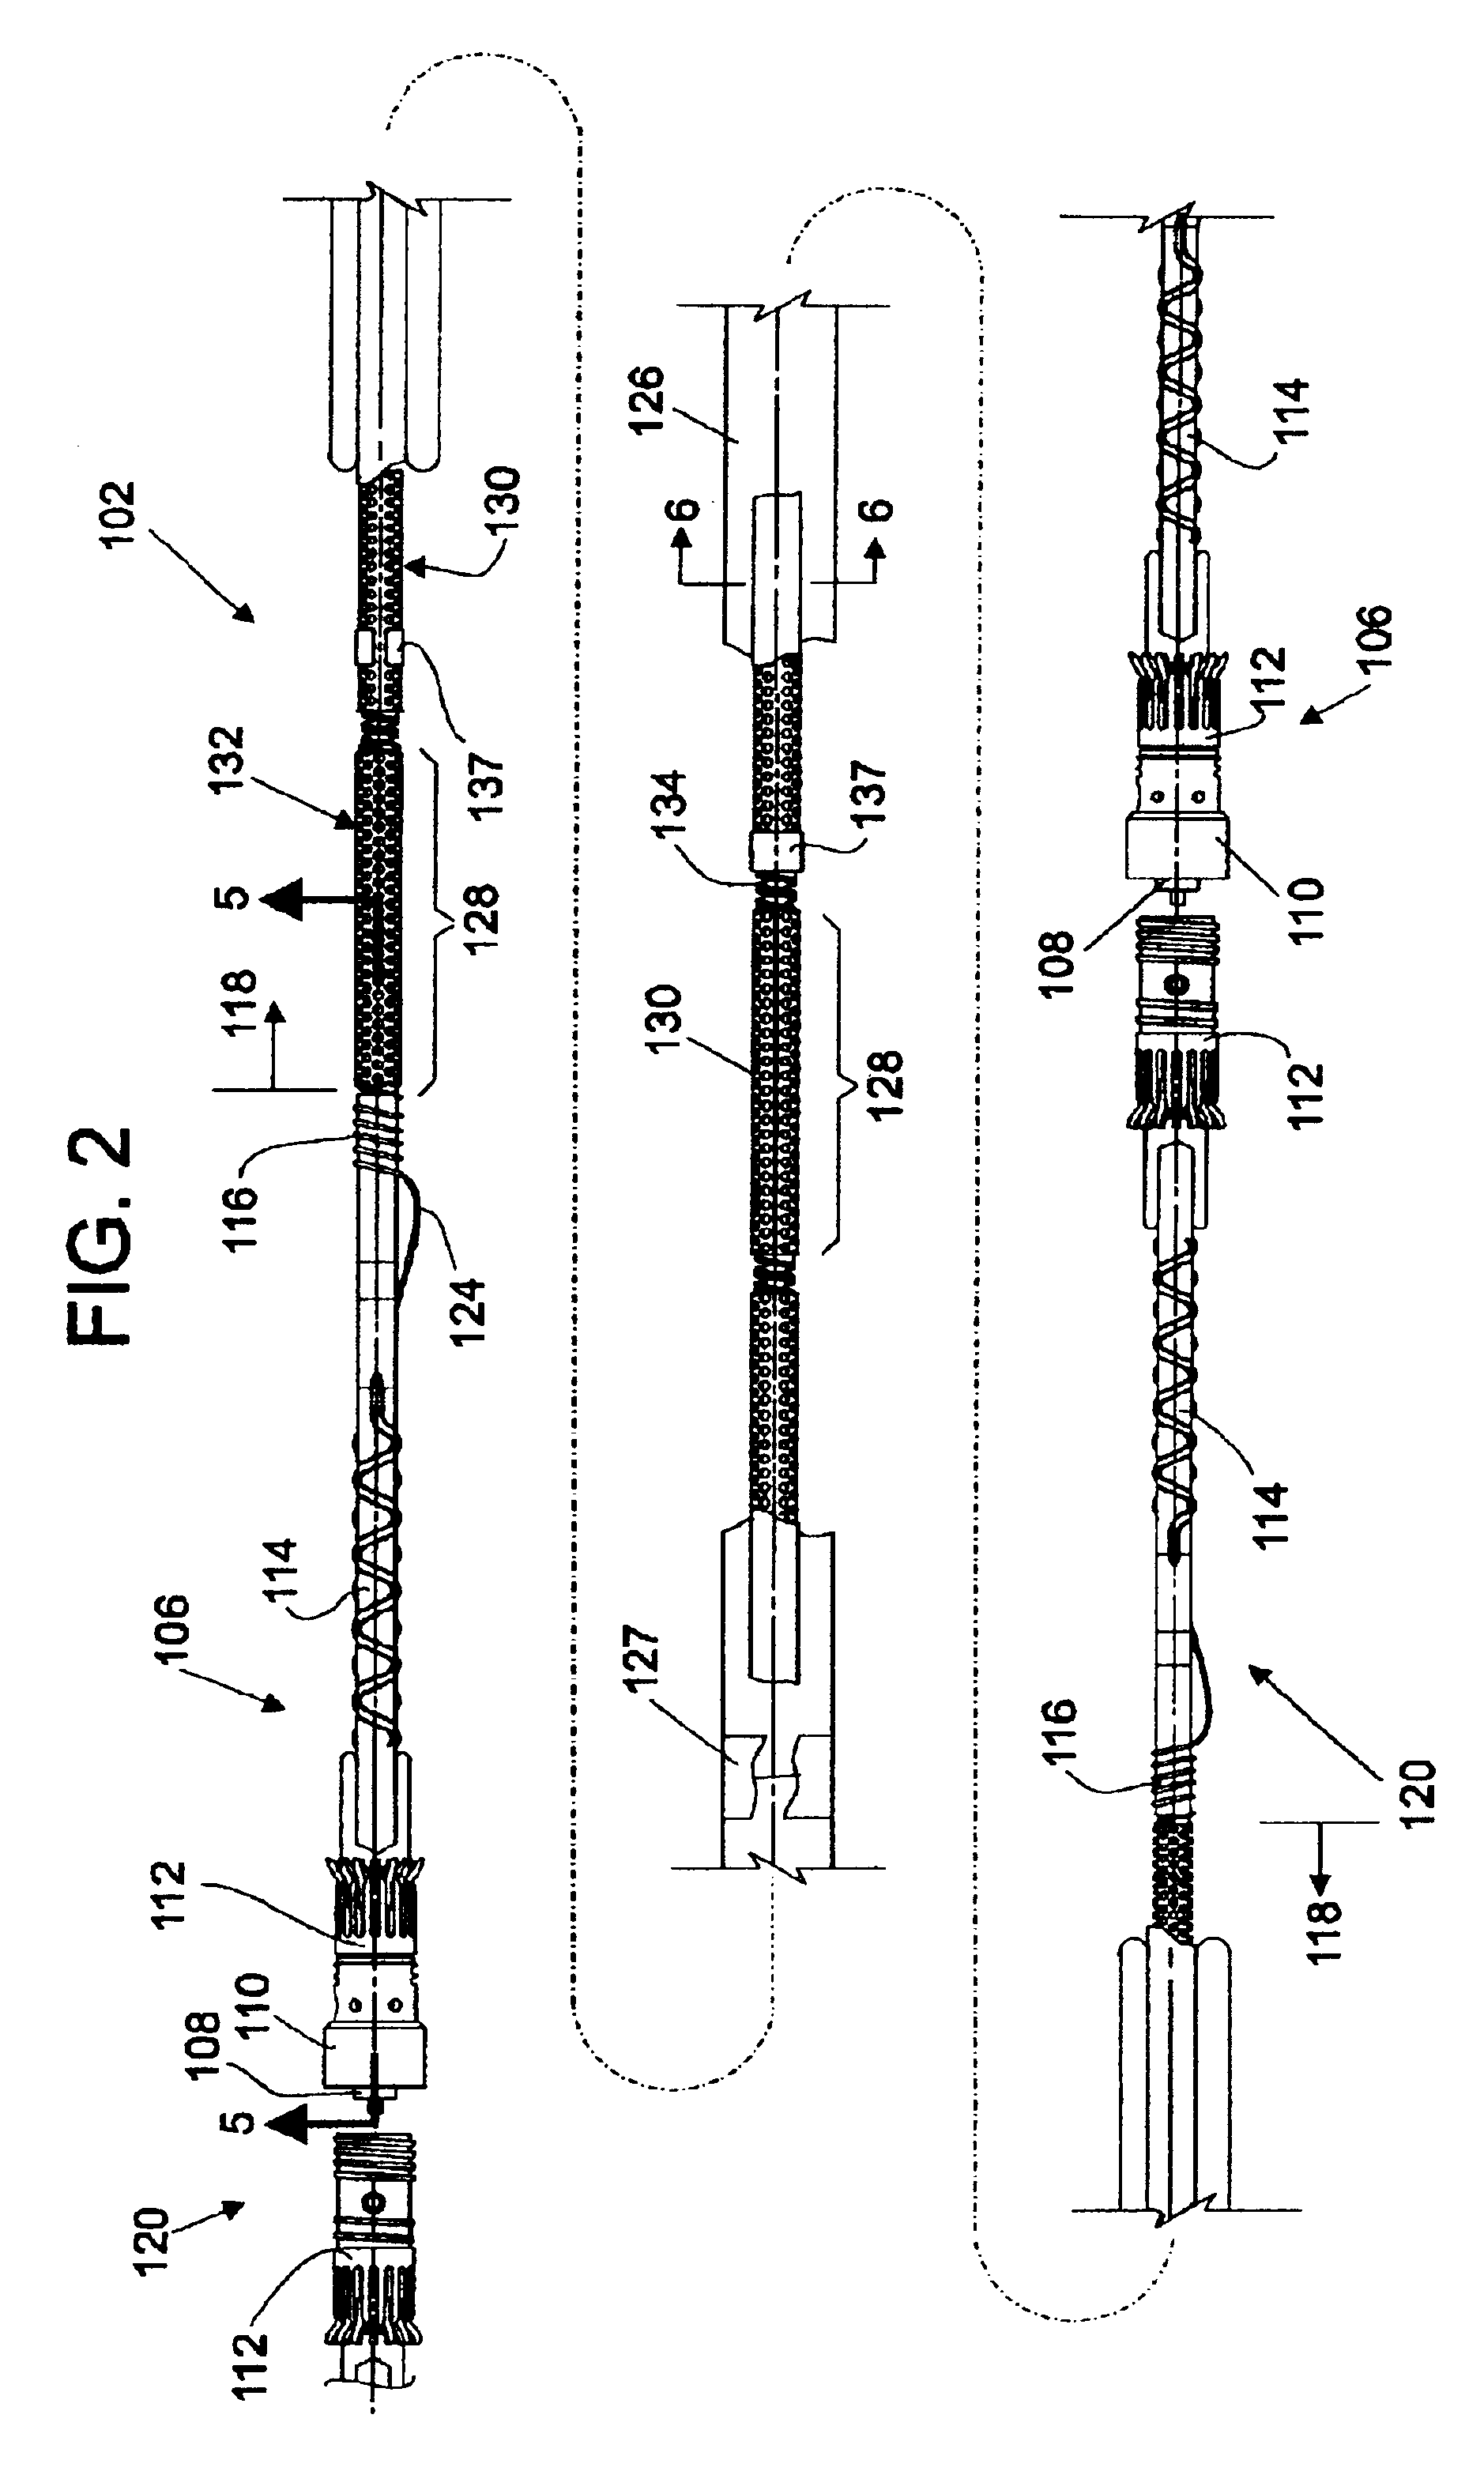 Termination assembly for use in optical fiber hydrophone array